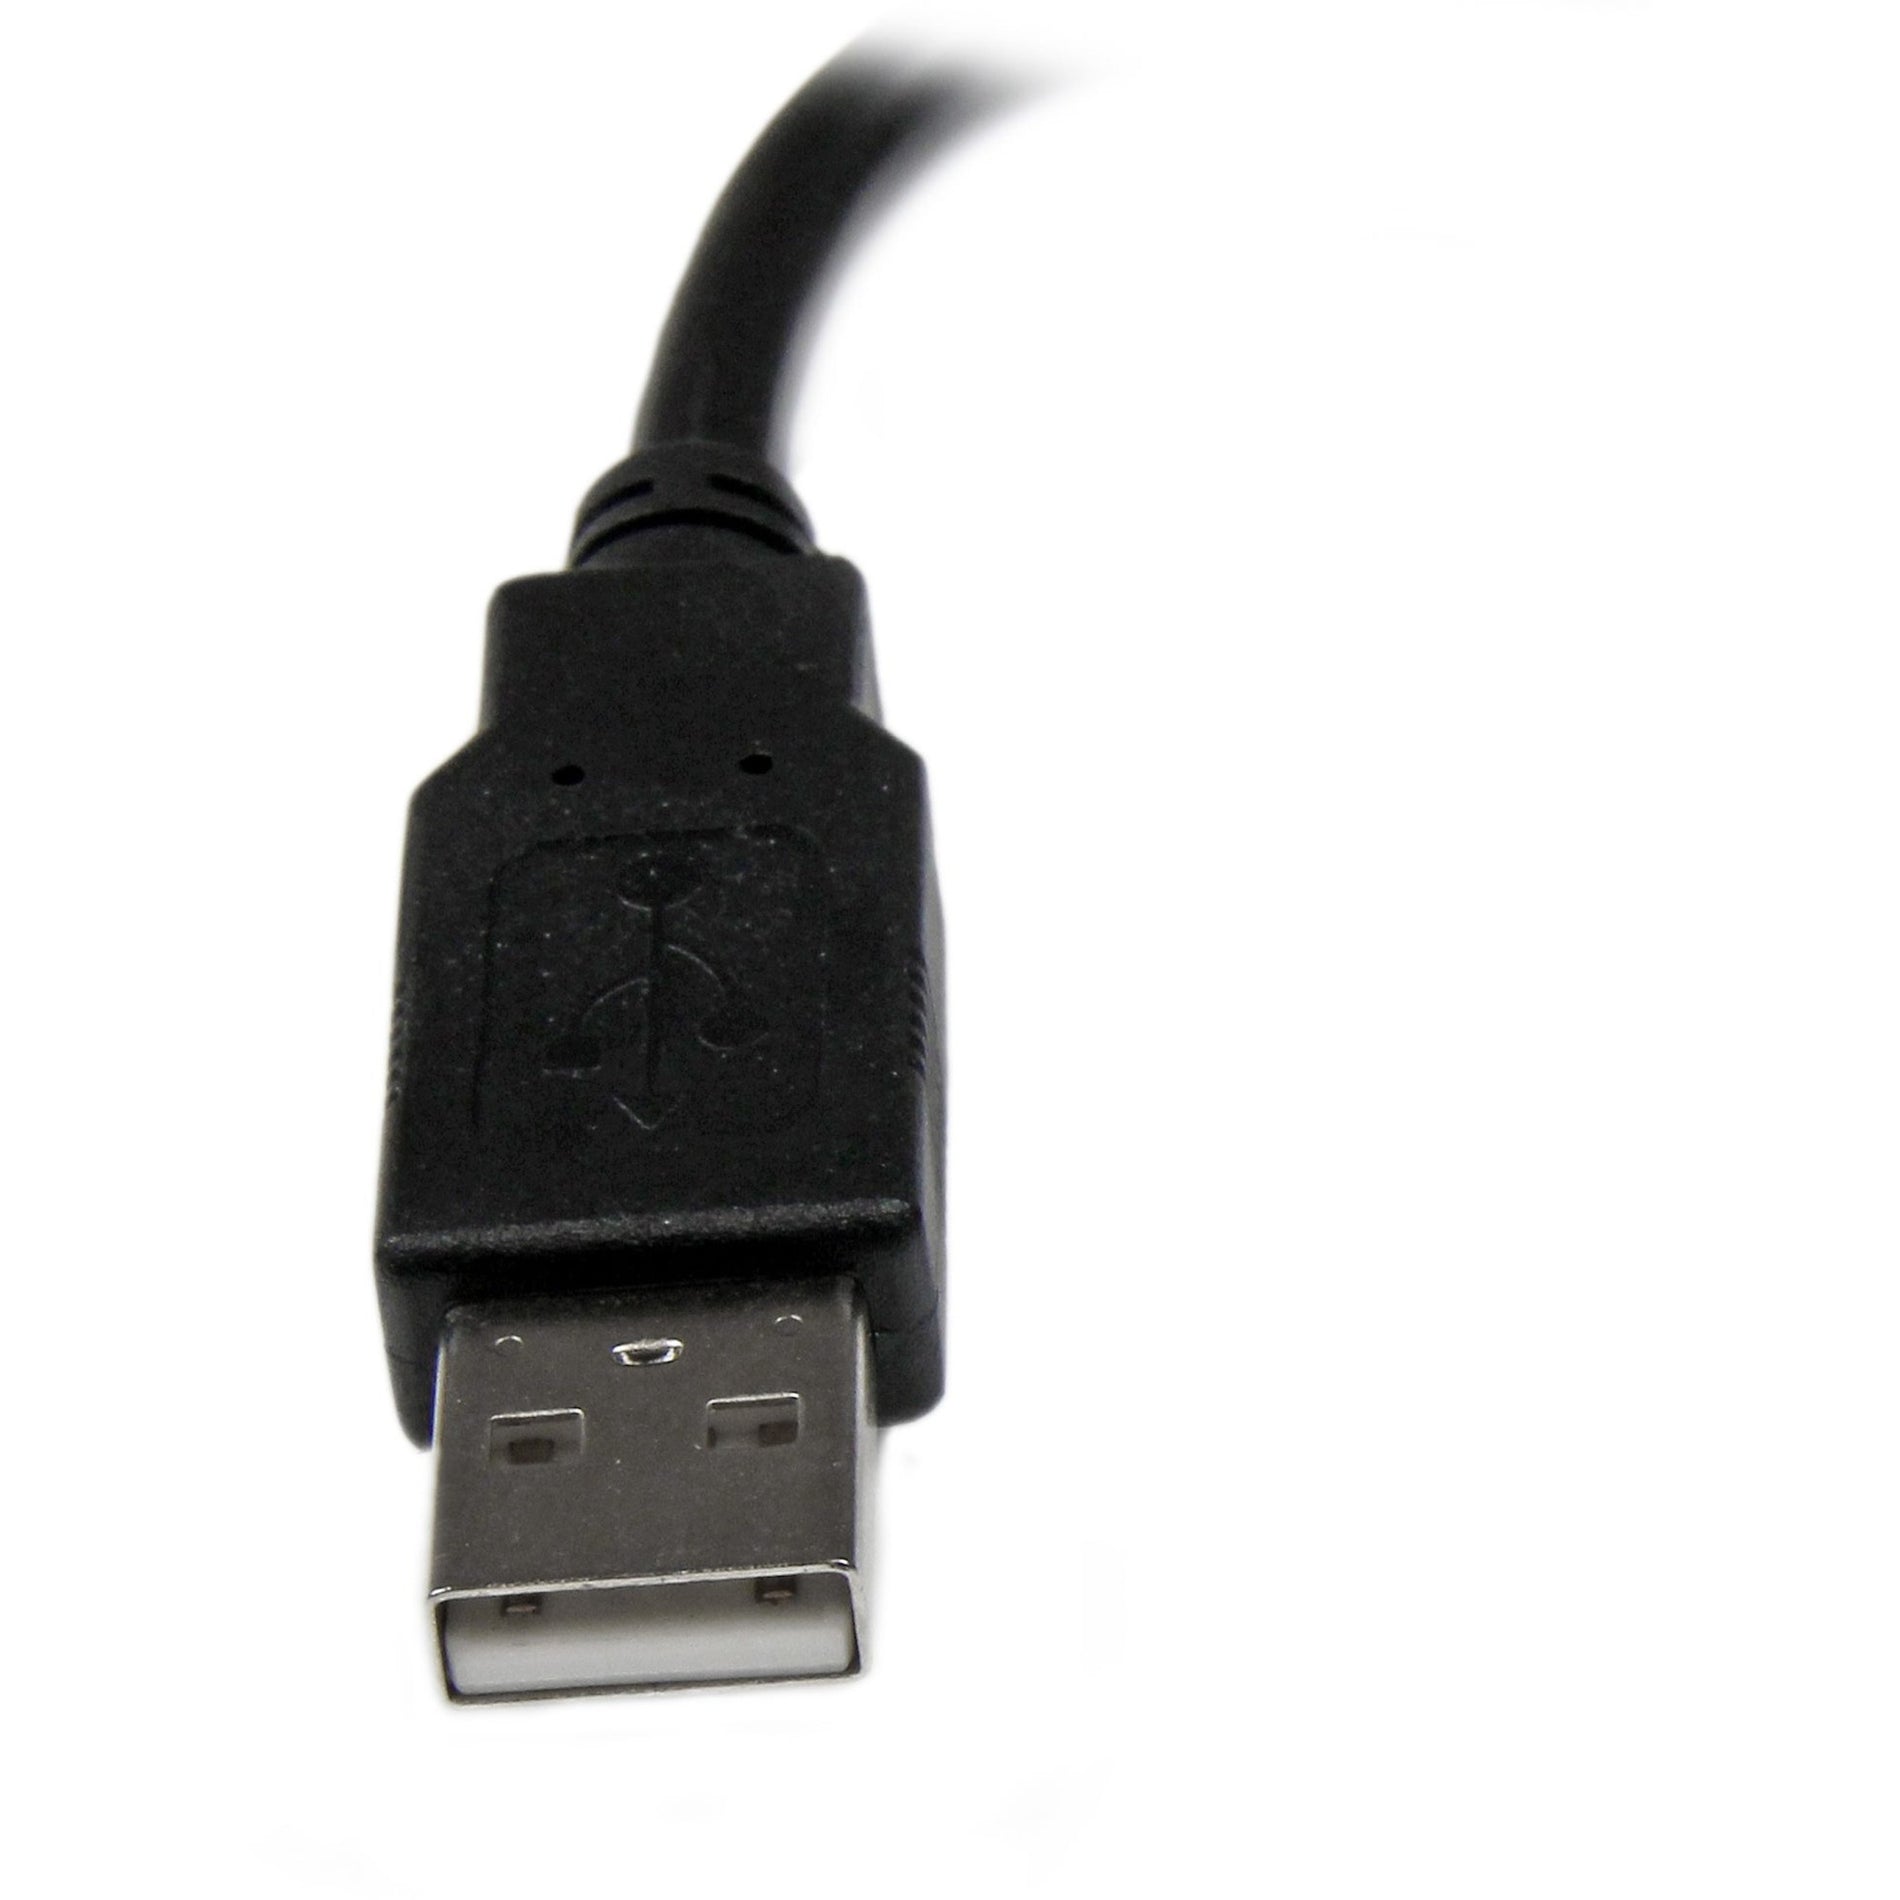 StarTech.com USBEXTAA6IN 6in USB 2.0 Extension Adapter Cable A to A - M/F, Data Transfer Cable